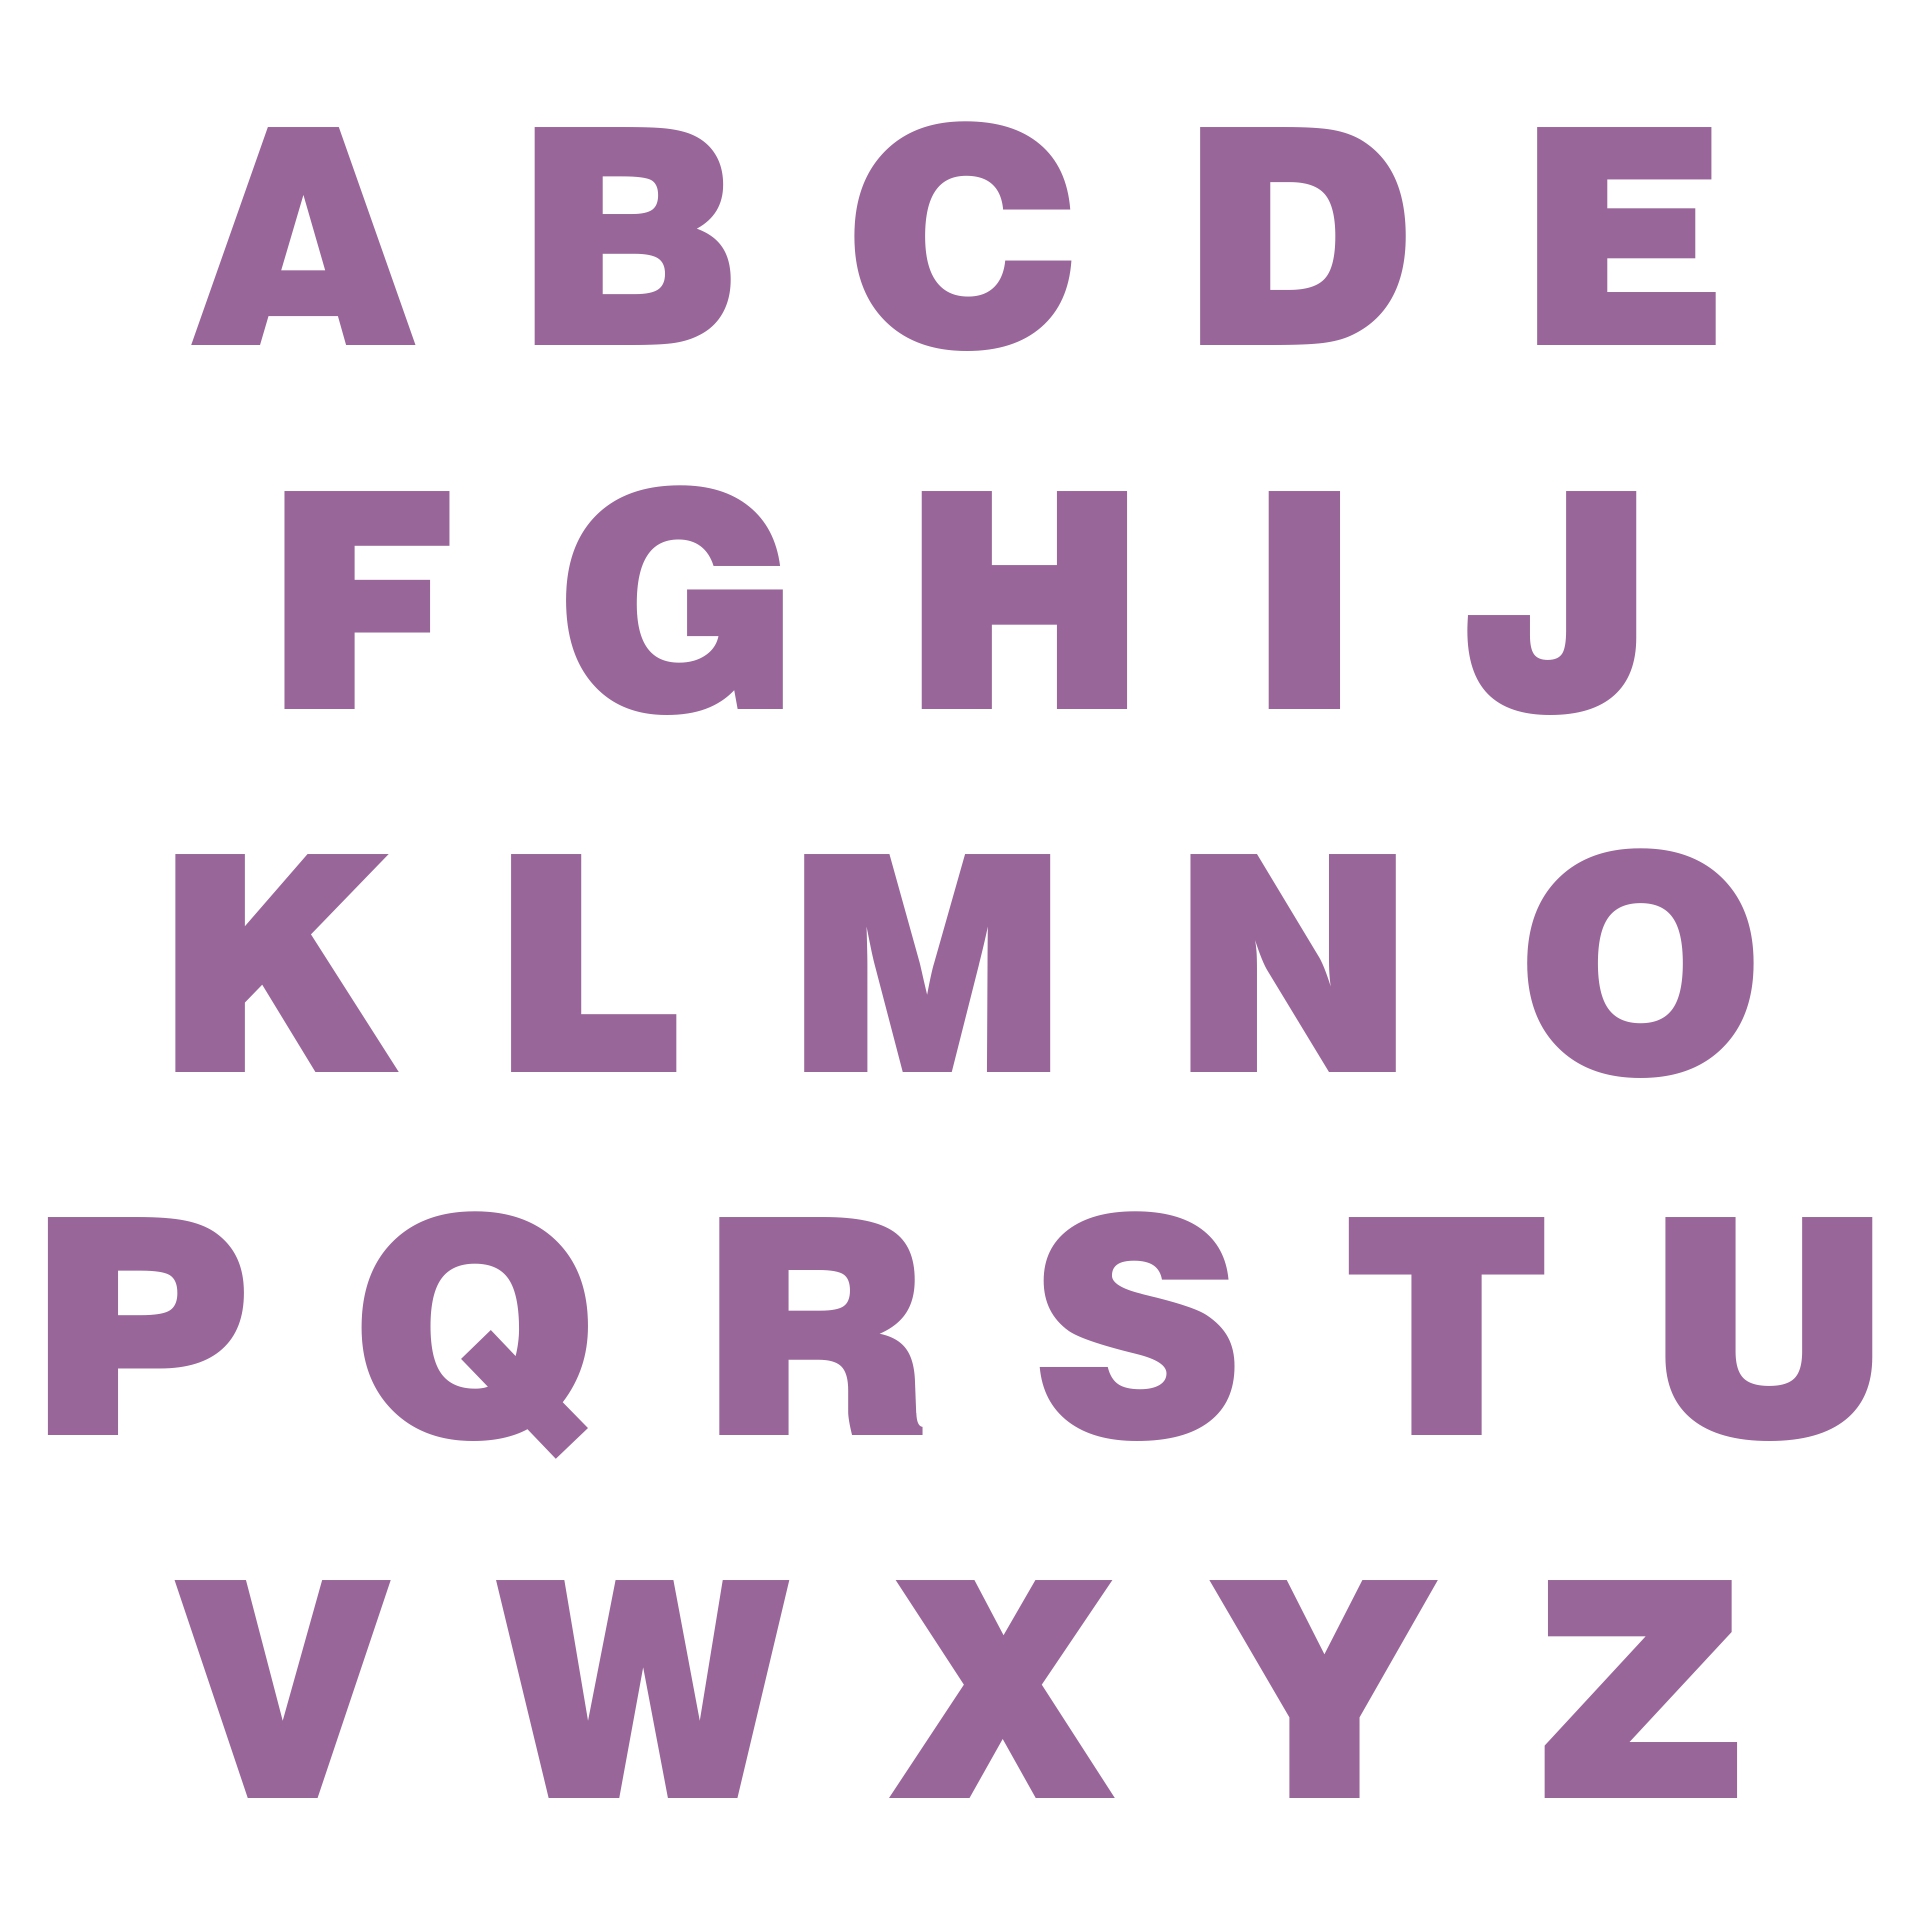 9 Best Images of Full Size Printable Letters Large Size Alphabet